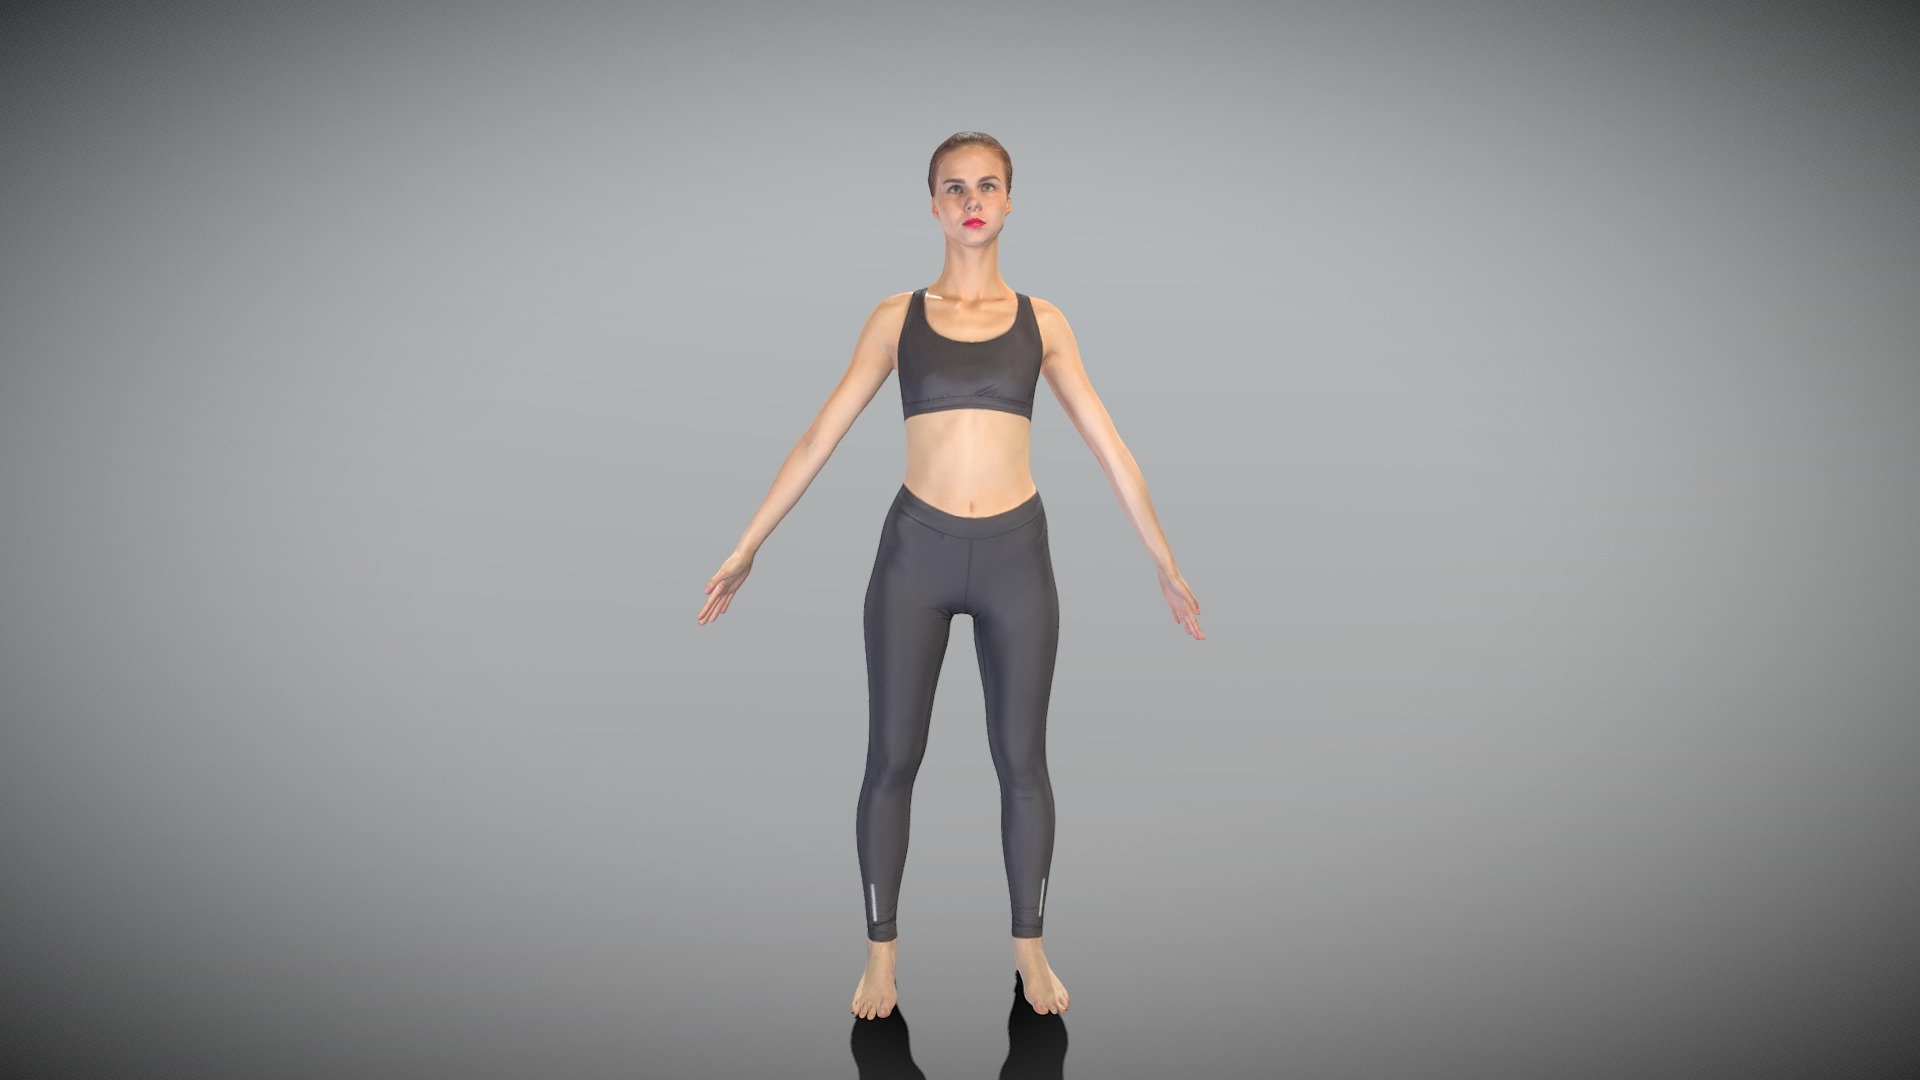 This is a true human size detailed model of a beautiful young woman of Caucasian appearance dressed in sportswear. The model is captured in the A-pose with mesh ready for rigging and animation in all most usable 3d software.

Technical specifications:




digital double scan model

low-poly model

high-poly model (.ztl tool with 5-6 subdivisions) clean and retopologized automatically via ZRemesher

fully quad topology

sufficiently clean

edge Loops based

ready for subdivision

8K texture color map

non-overlapping UV map

ready for animation

PBR textures 8K resolution: Normal, Displacement, Albedo maps

Download package includes a Cinema 4D project file with Redshift shader, OBJ, FBX, STL files, which are applicable for 3ds Max, Maya, Unreal Engine, Unity, Blender, etc. All the textures you will find in the “Tex” folder, included into the main archive.

3D EVERYTHING

Stand with Ukraine! - Beautiful sporty woman ready for animation 450 - Buy Royalty Free 3D model by deep3dstudio 3d model